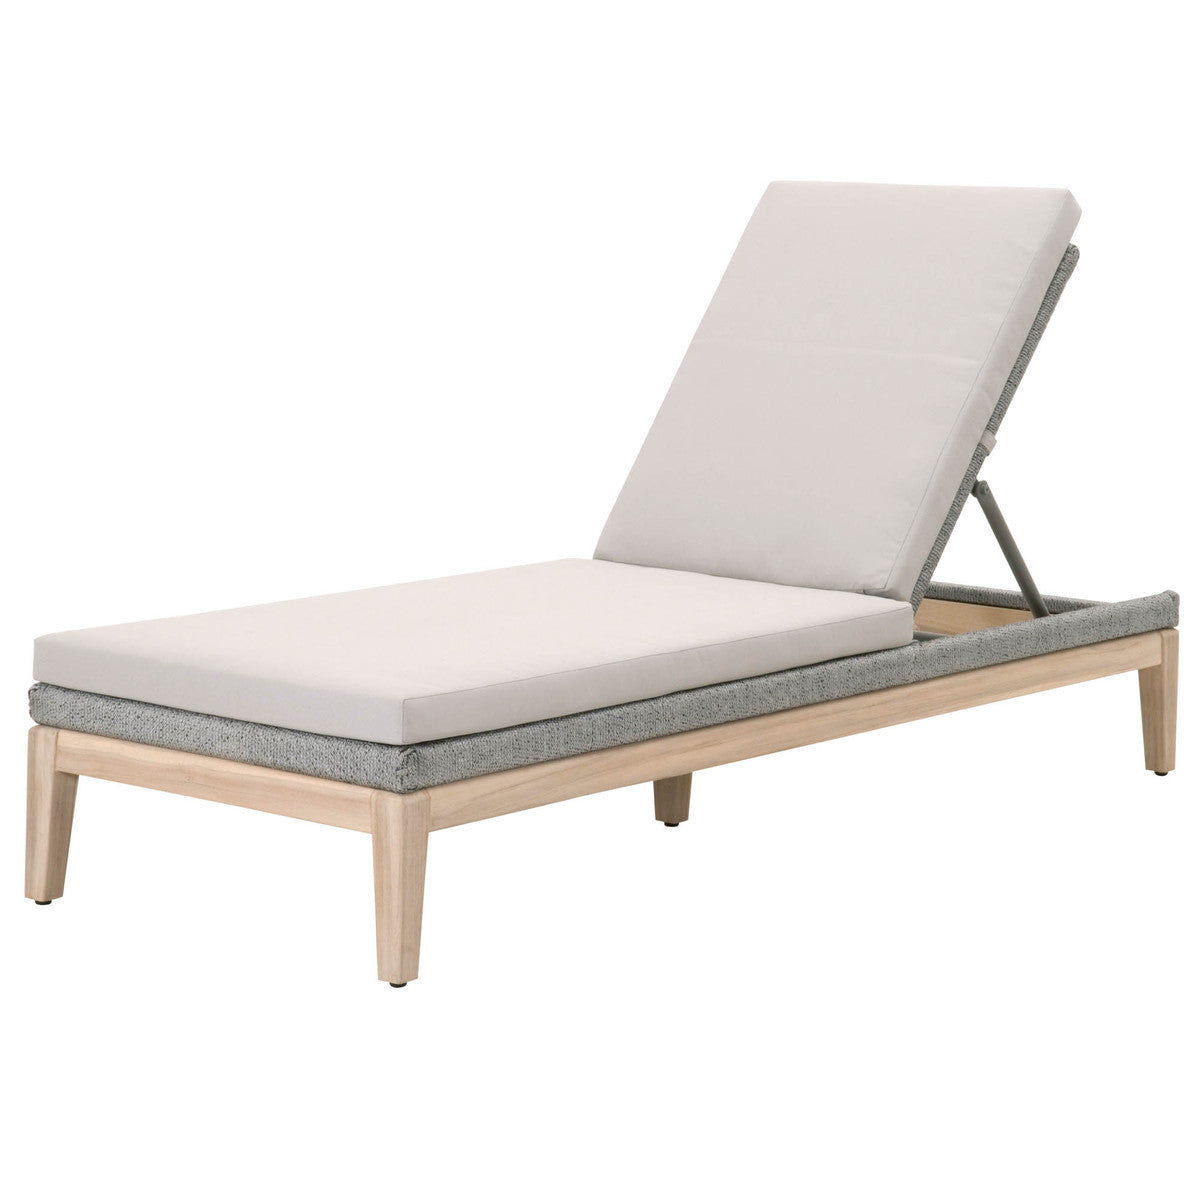 Loom Outdoor Chaise